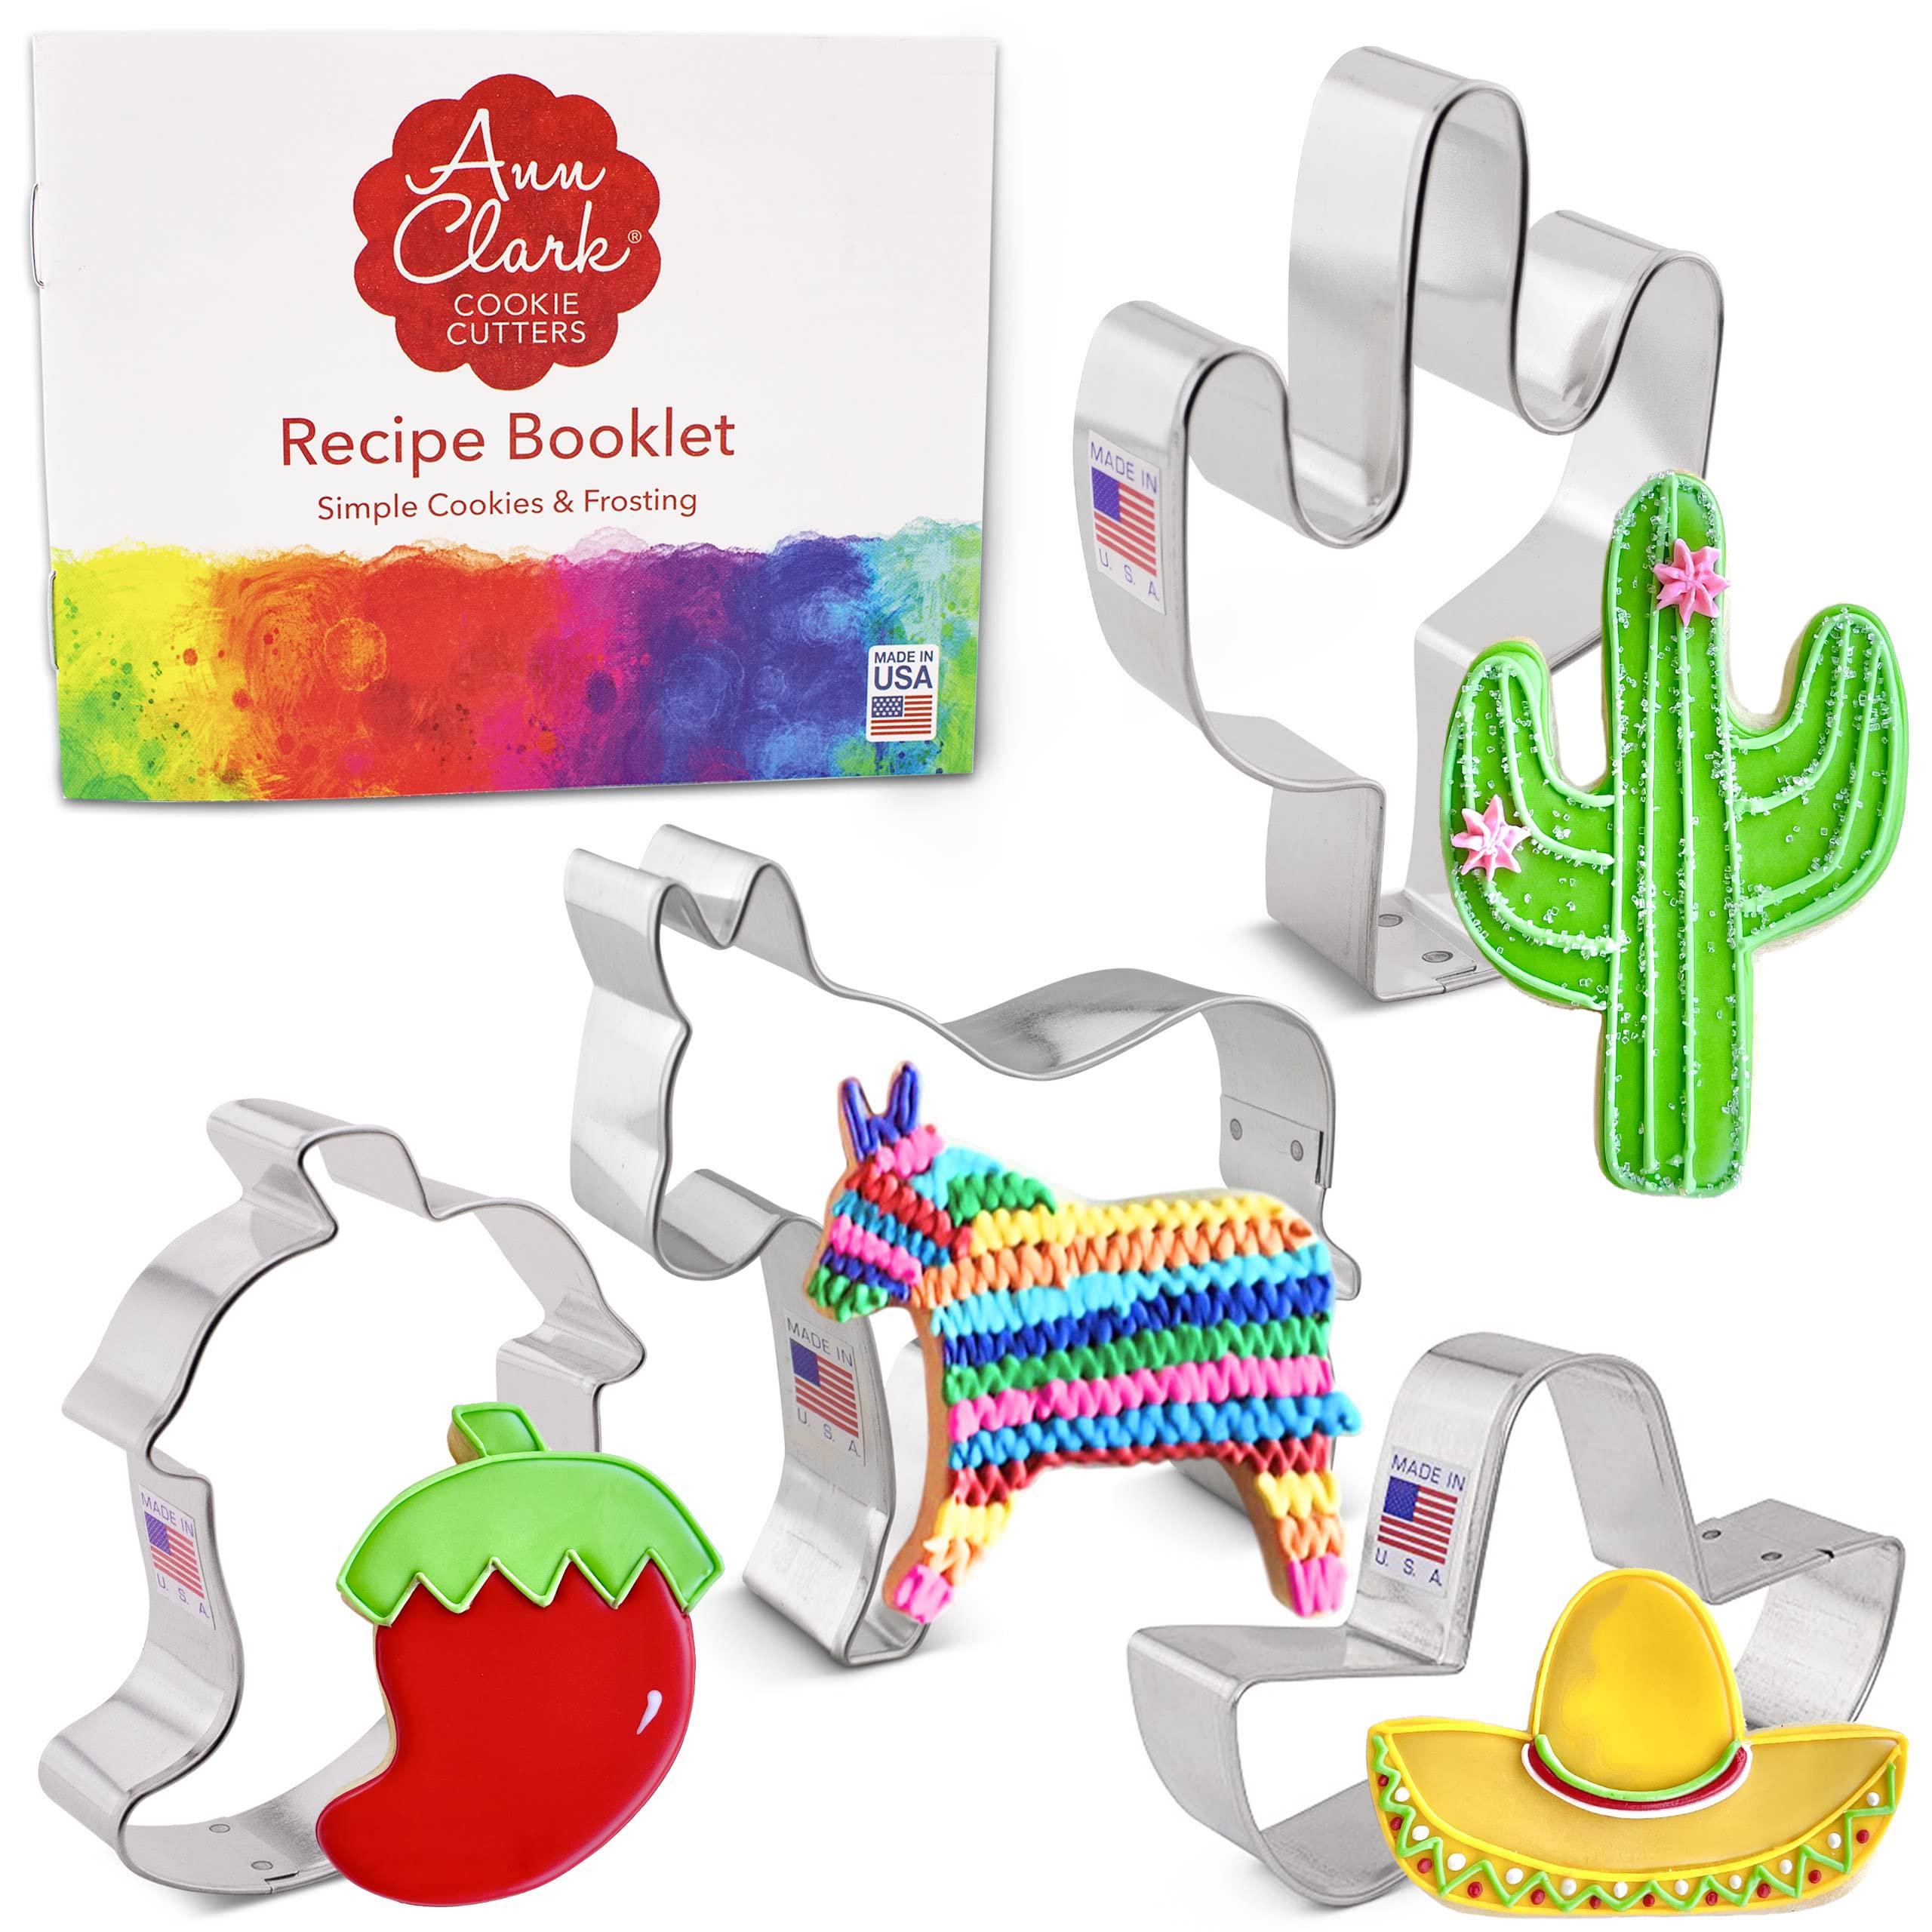 Ann Clark Cookie Cutters cinco de mayo cookie cutters 4-pc set made in usa by ann clark, donkey, cactus, sombrero, chili pepper